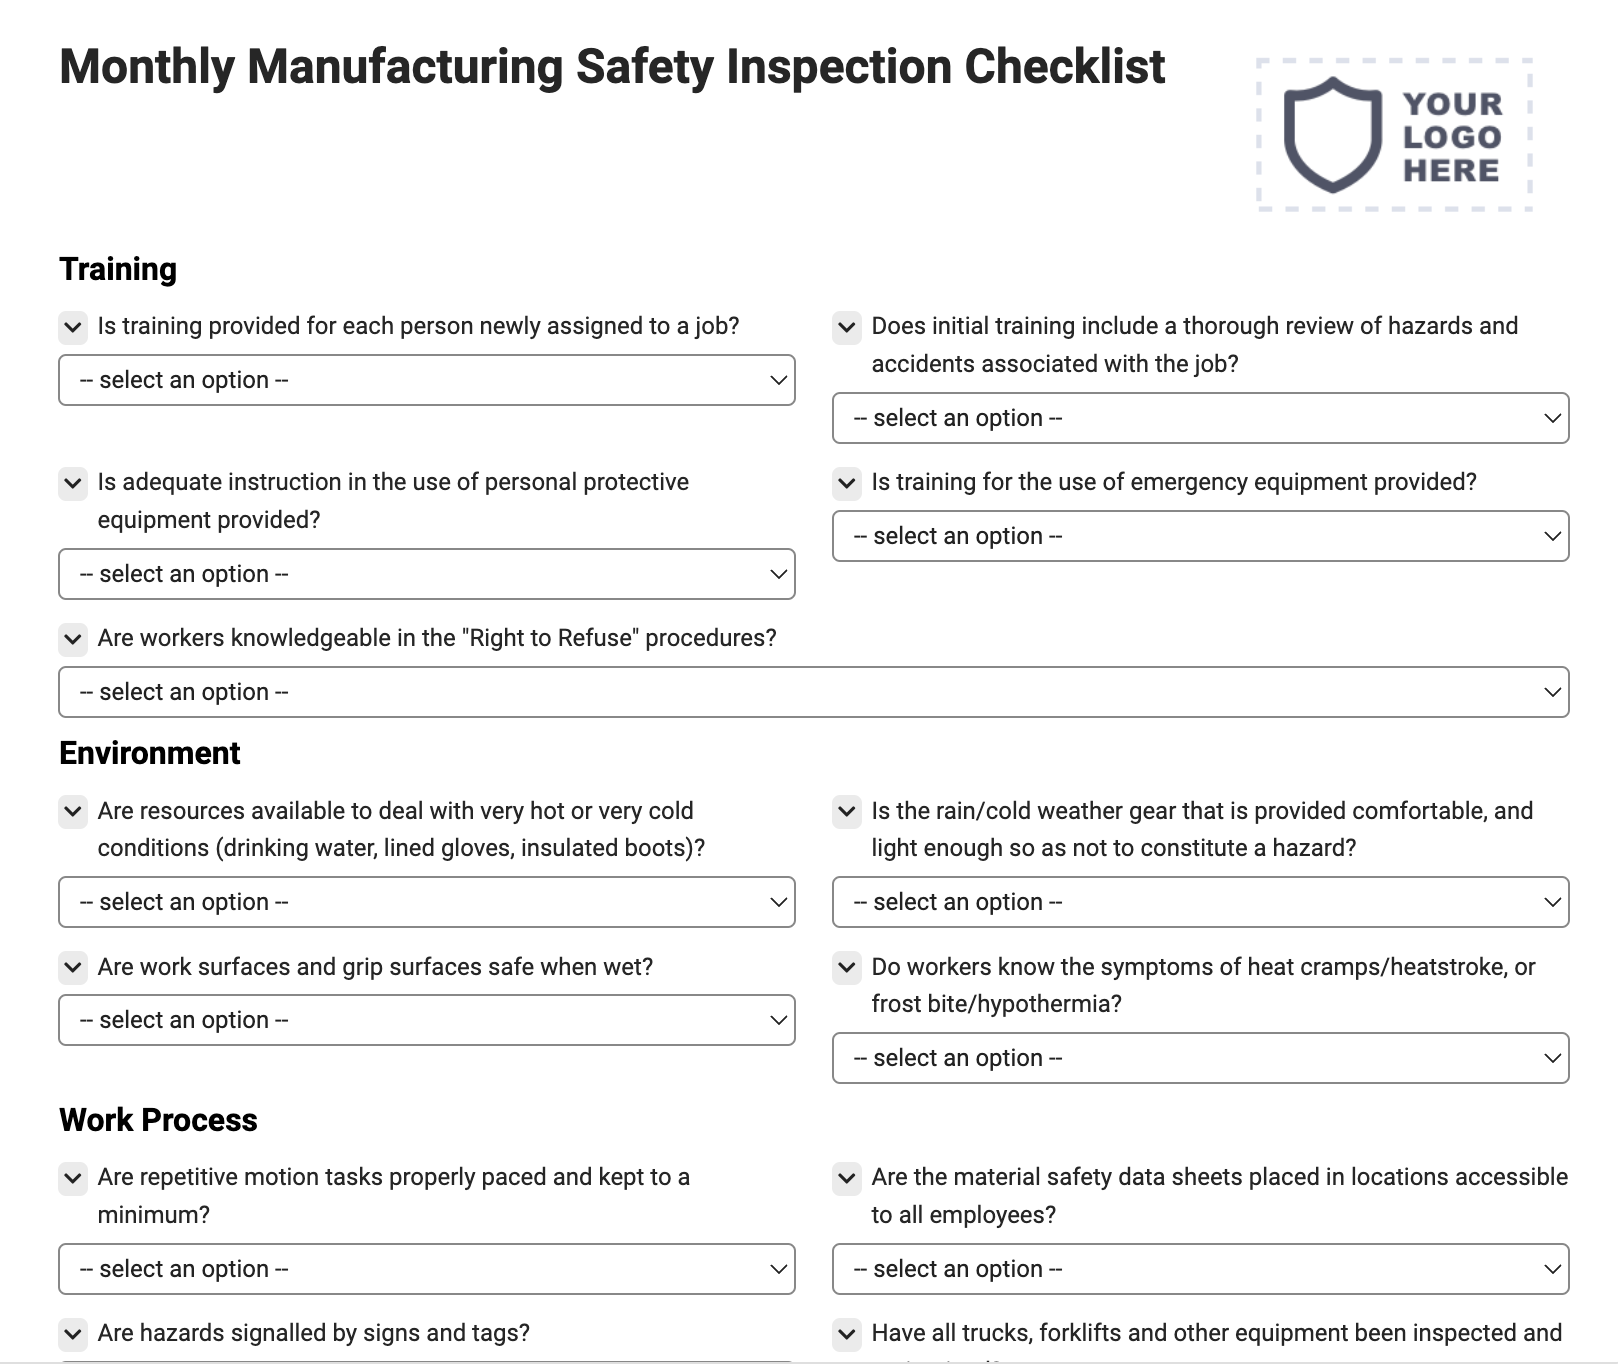 Monthly Manufacturing Safety Inspection Checklist